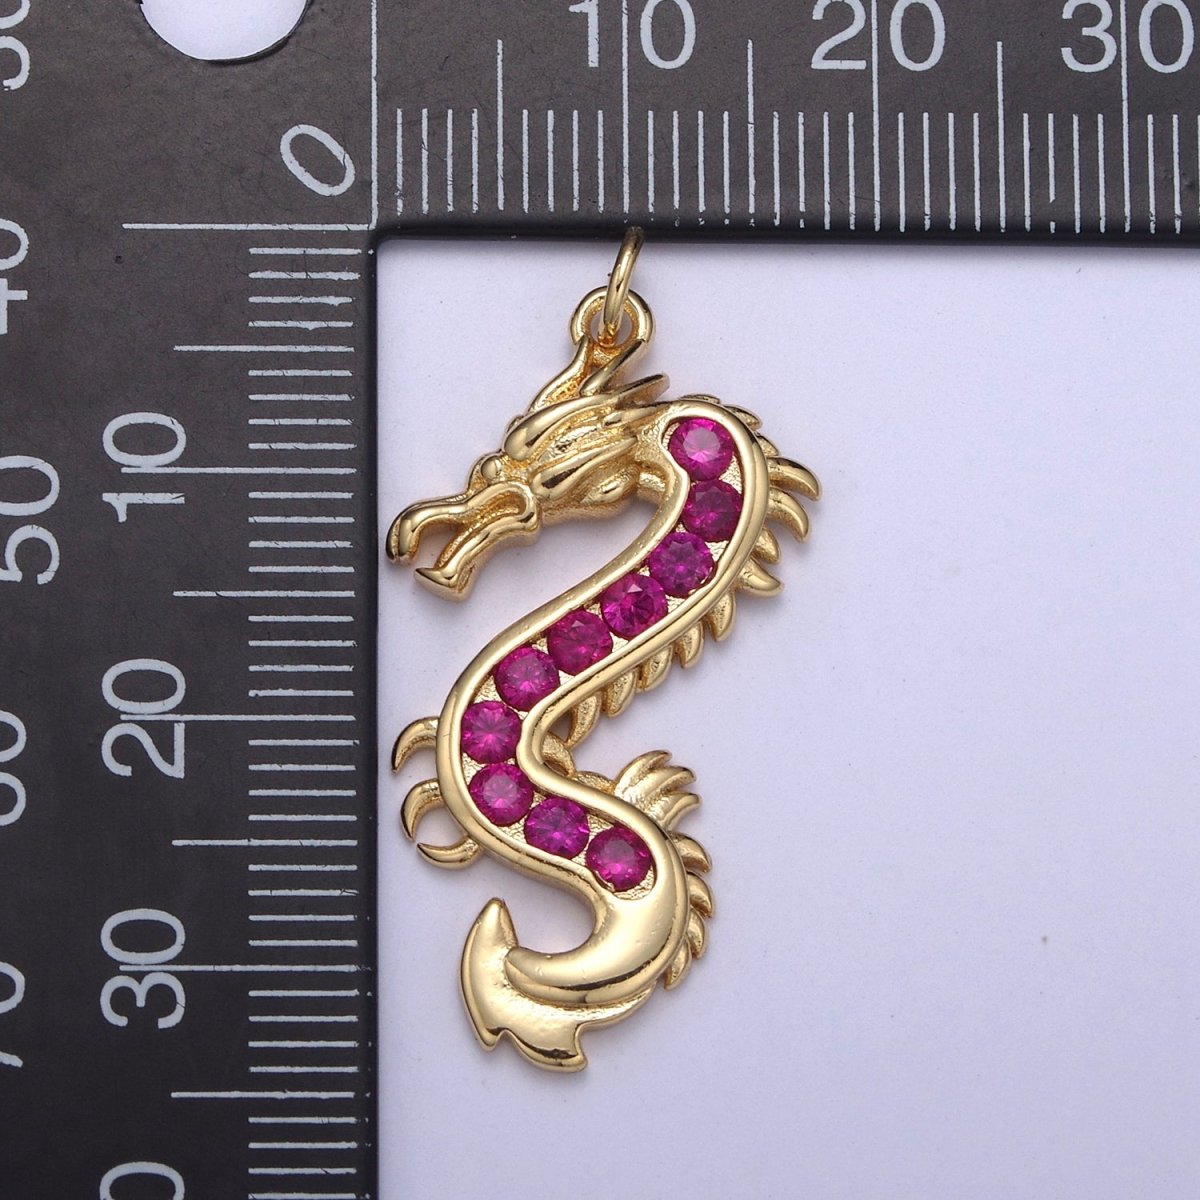 Mystical Dragon Pendant in 24K Gold Filled Animal Charm Cubic Zirconia Necklace Pendant N-406 - N-408 - DLUXCA